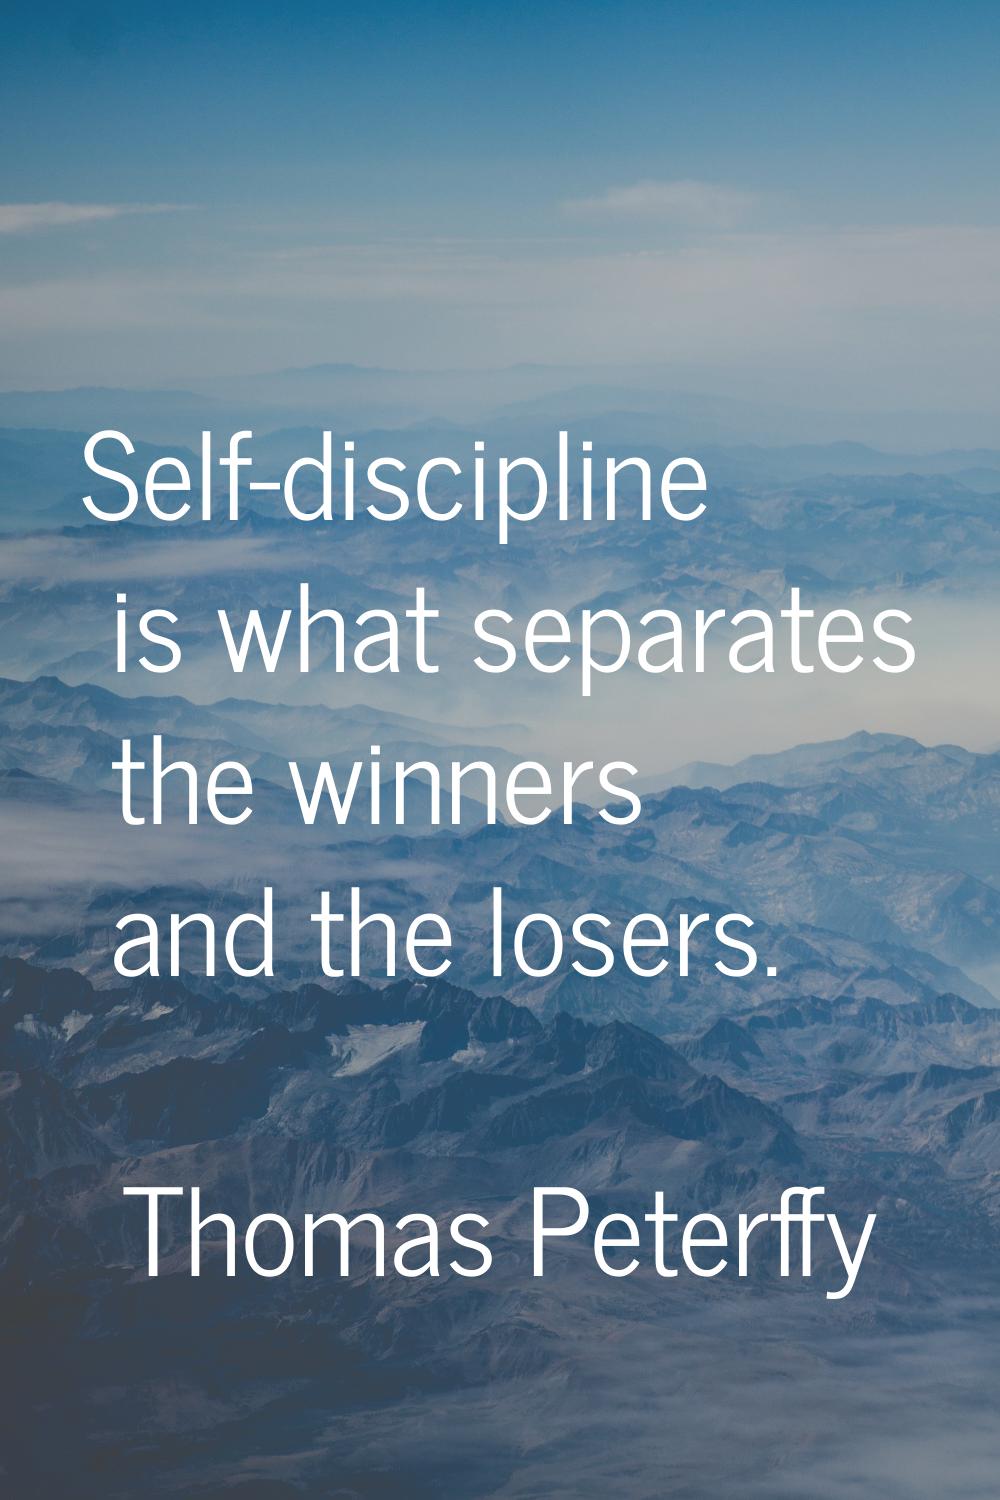 Self-discipline is what separates the winners and the losers.